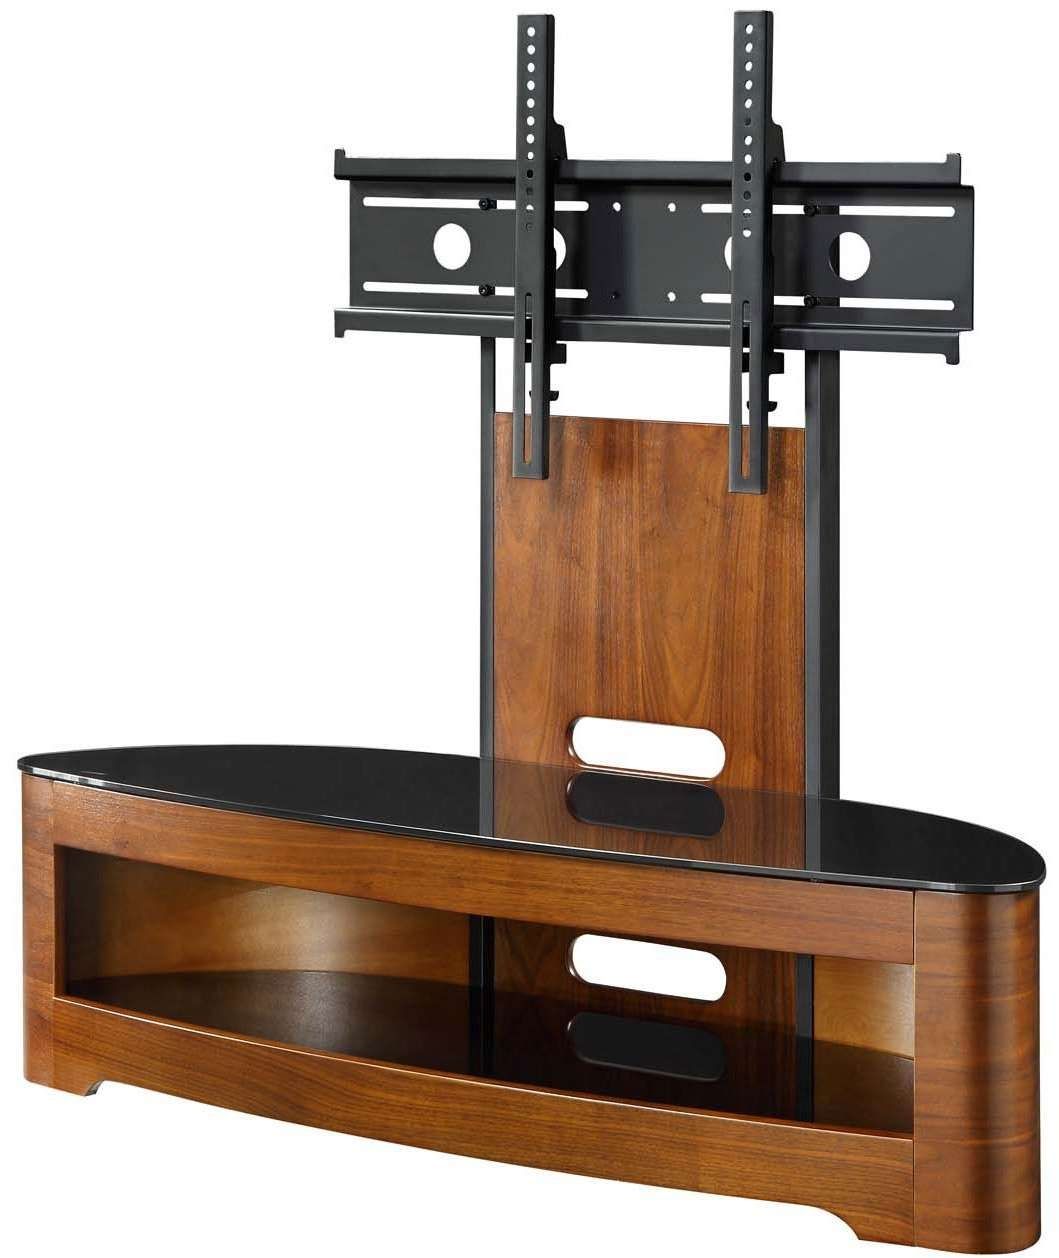 Jual Jf209 Wb Tv Stands Throughout Dark Walnut Tv Stands (Gallery 10 of 15)